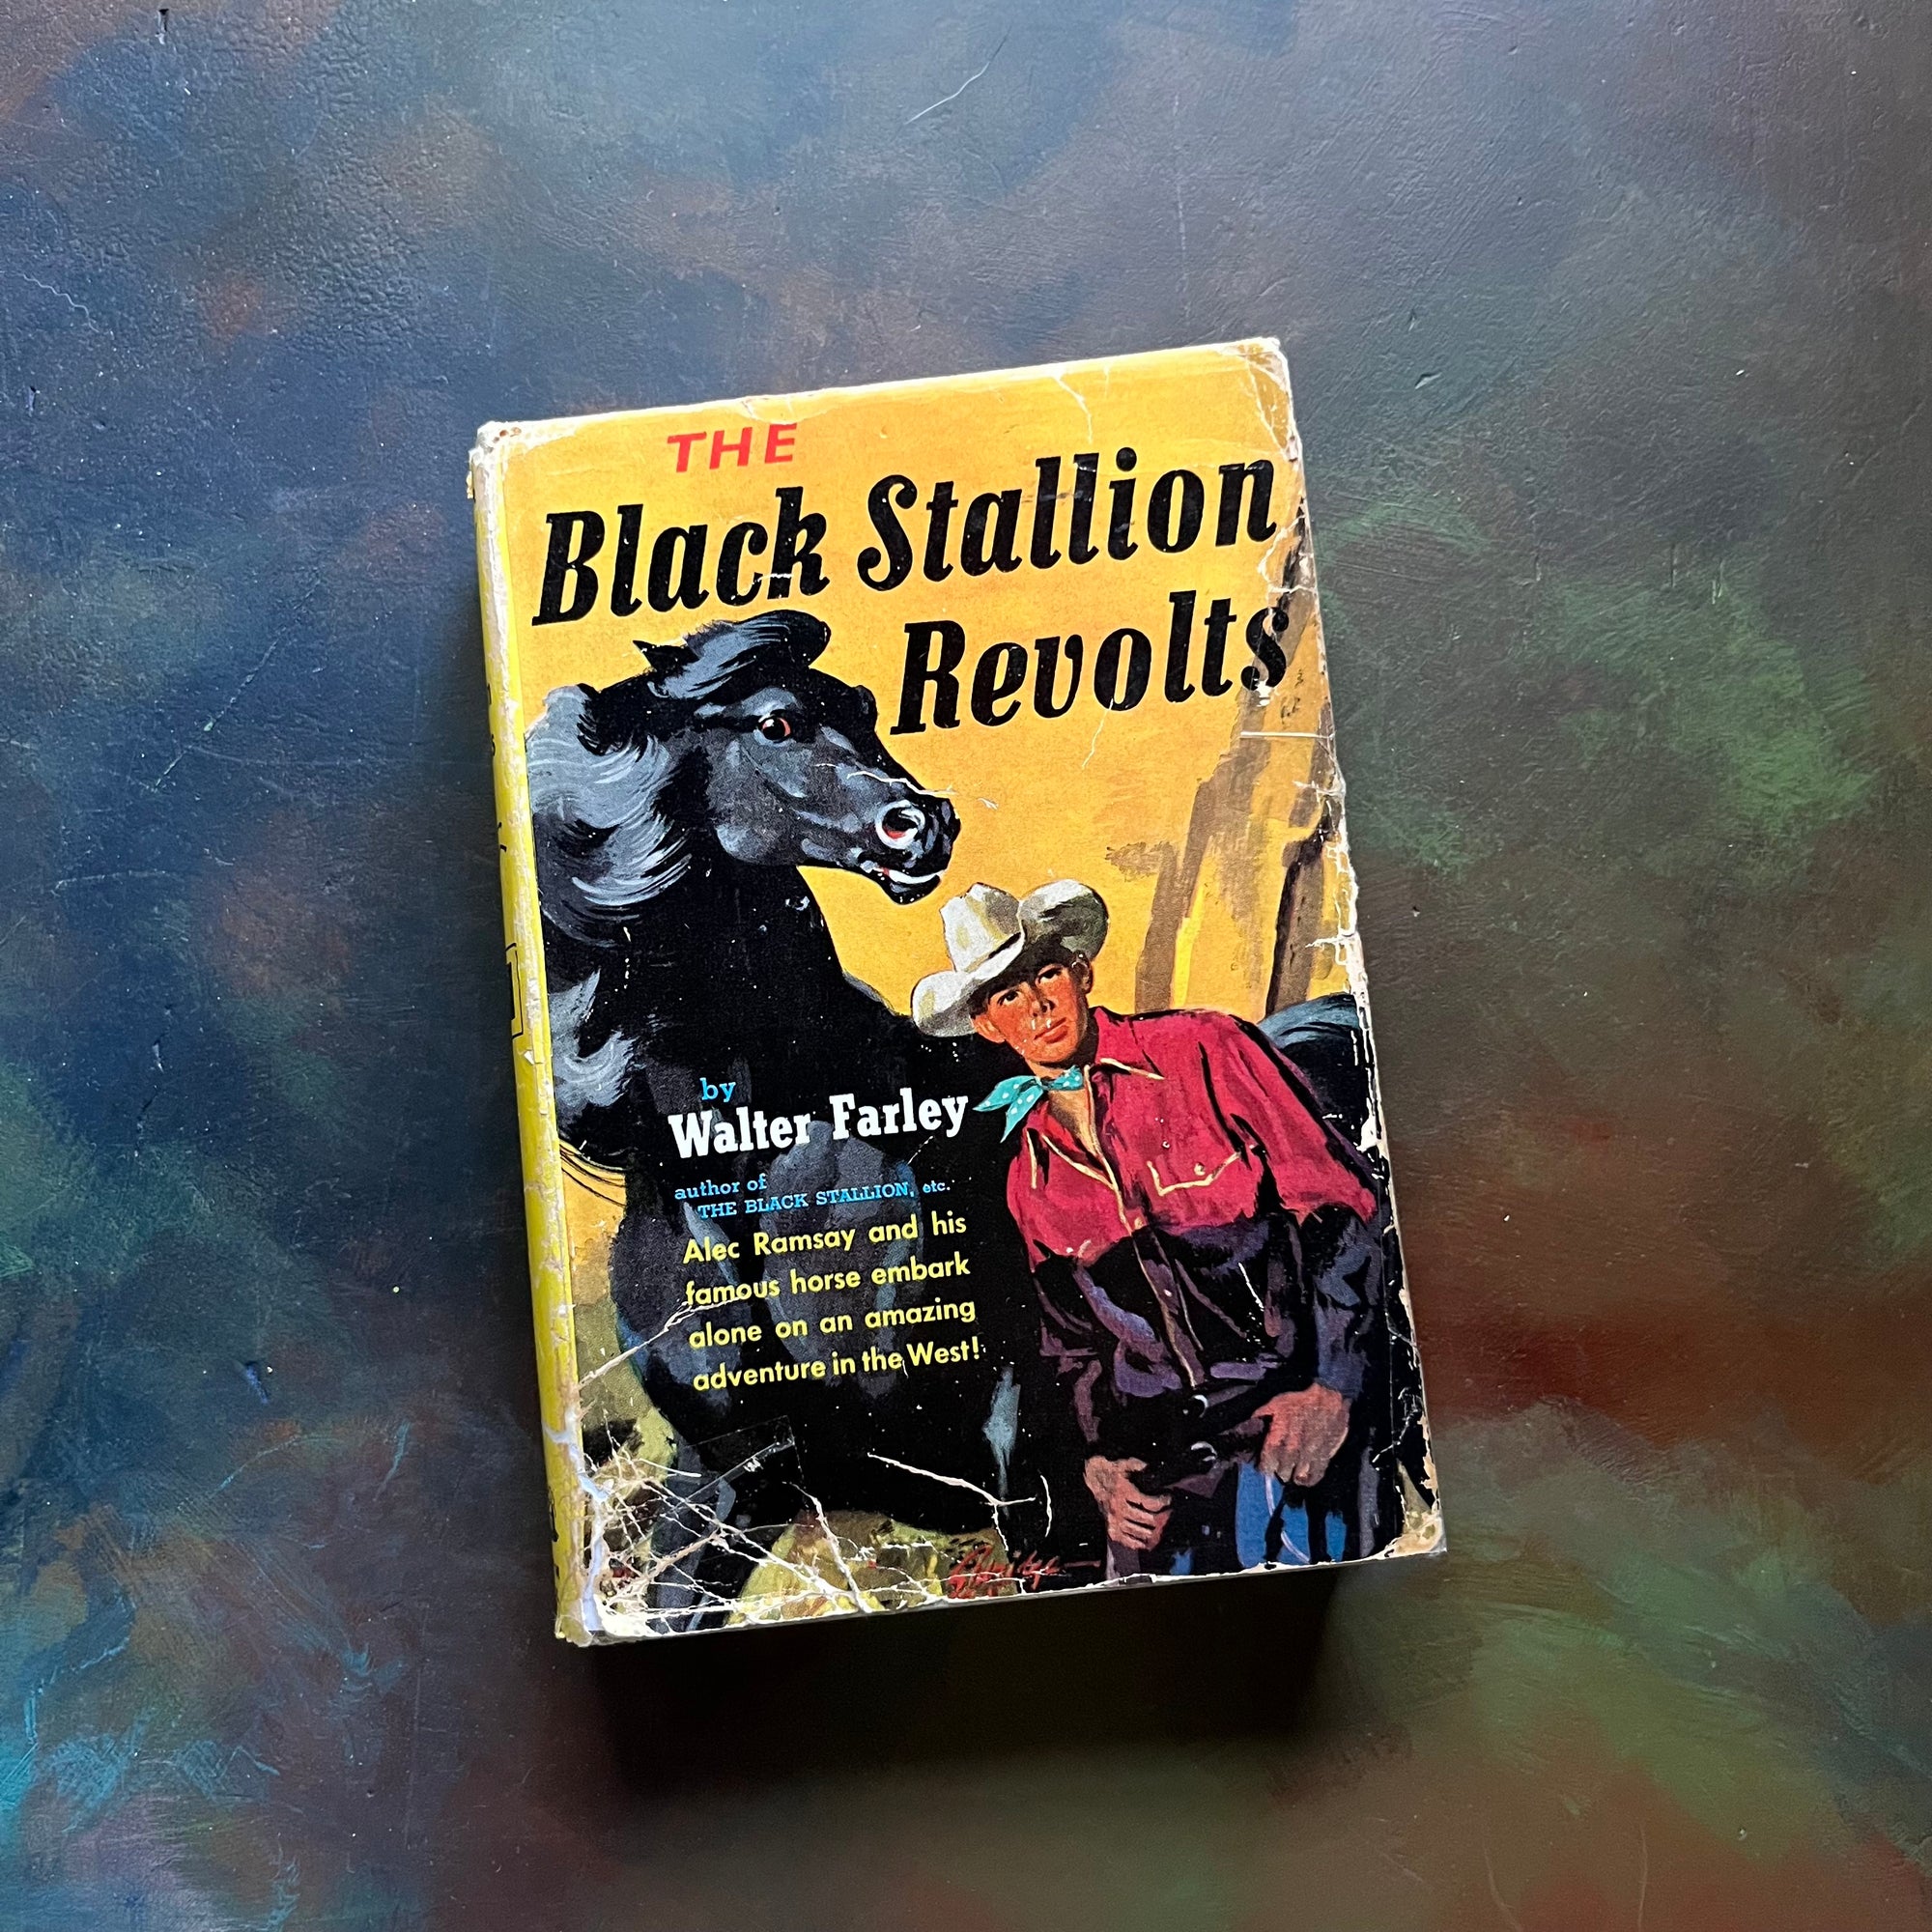 The Black Stallion Revolts by Walter Farley-vintage Black Stallion Serie Book-adventure books for children-view of the dust jacket's front cover